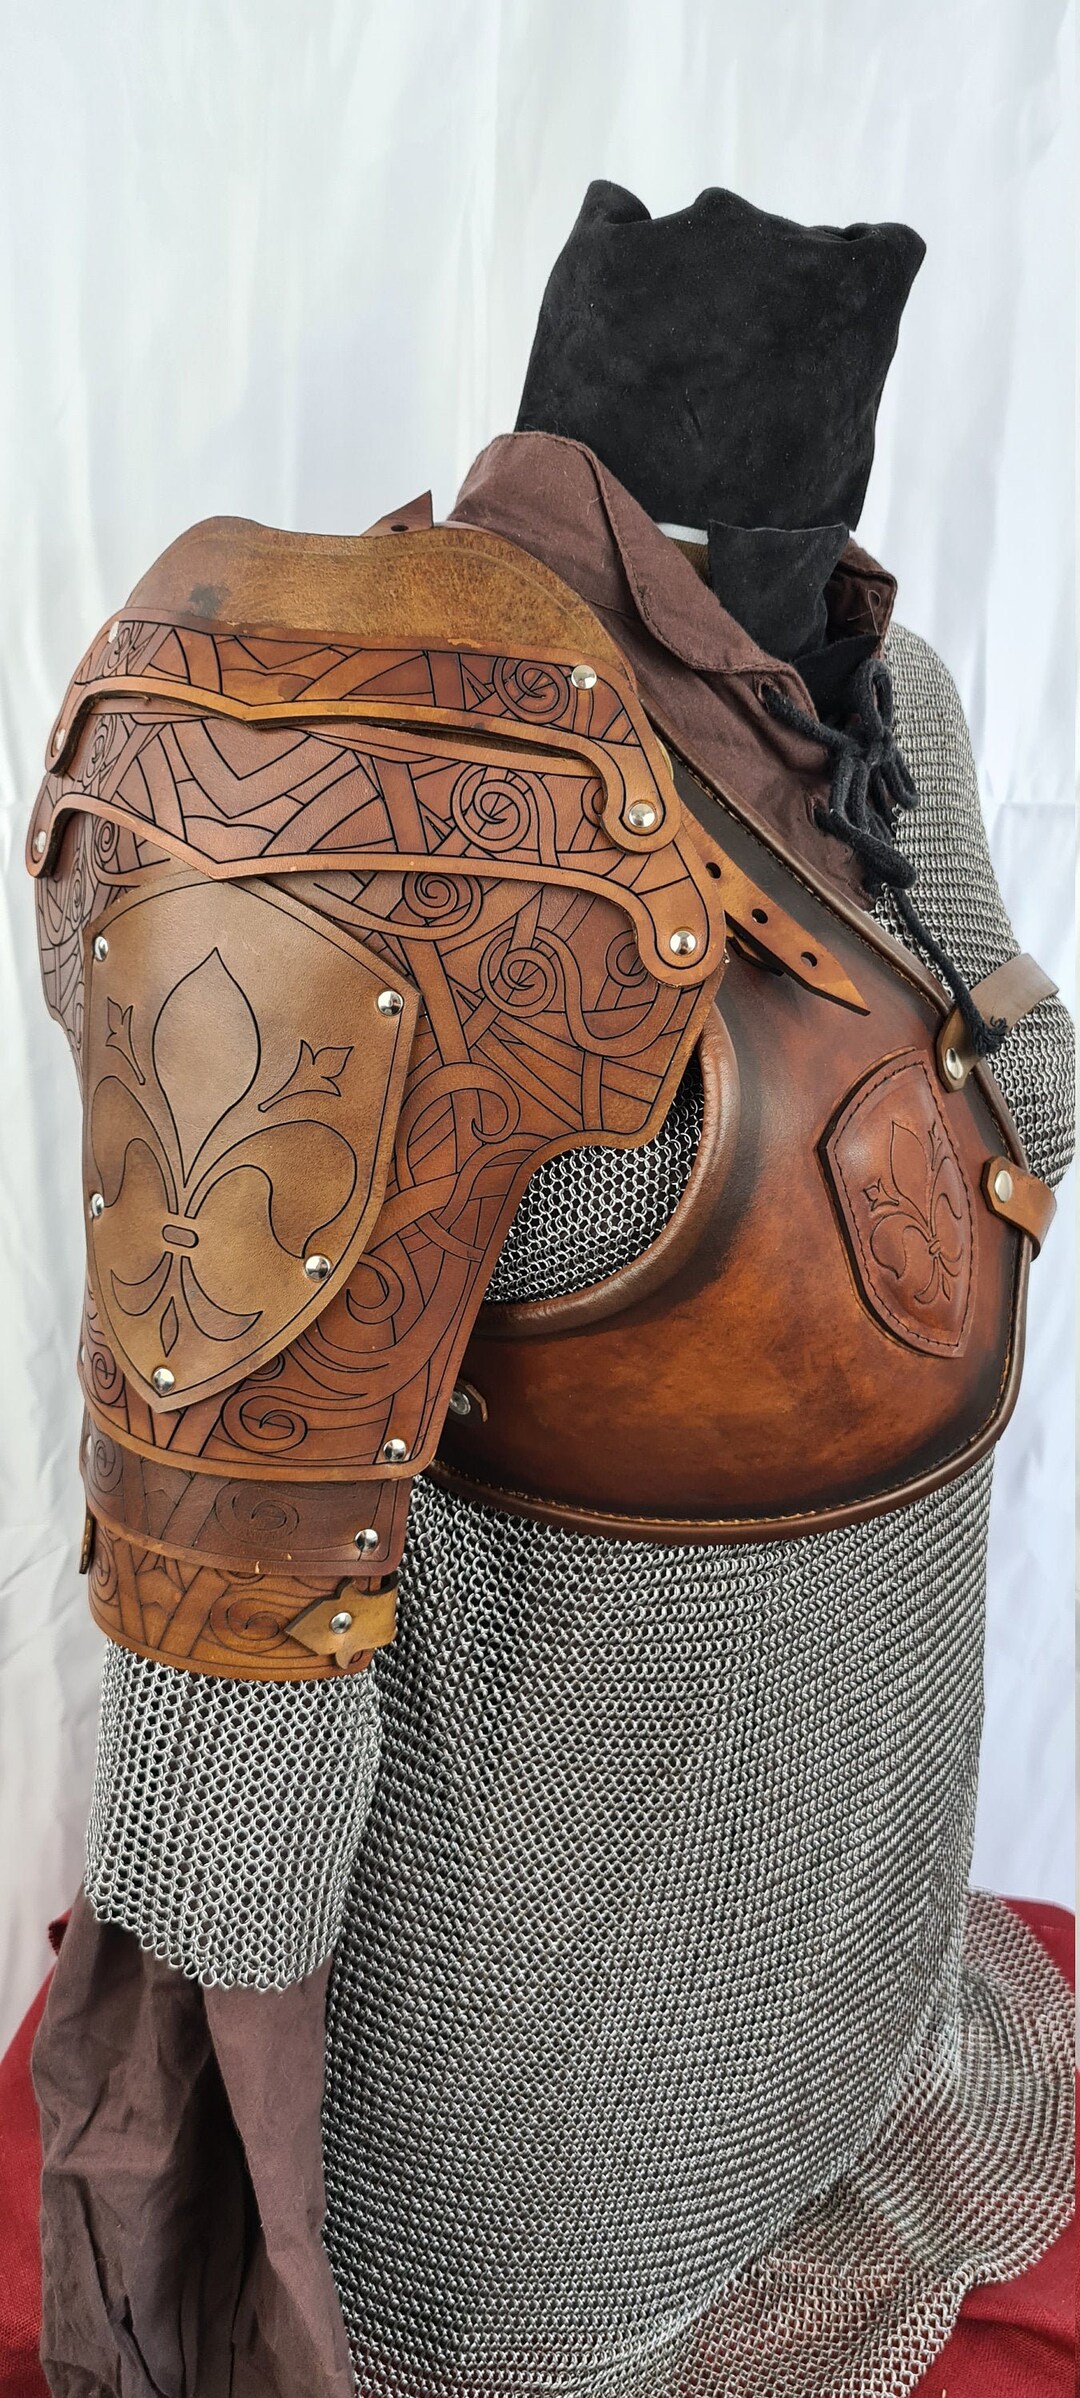 Athos MUSKETEERS LEATHER SHOULDER With Harness - Etsy